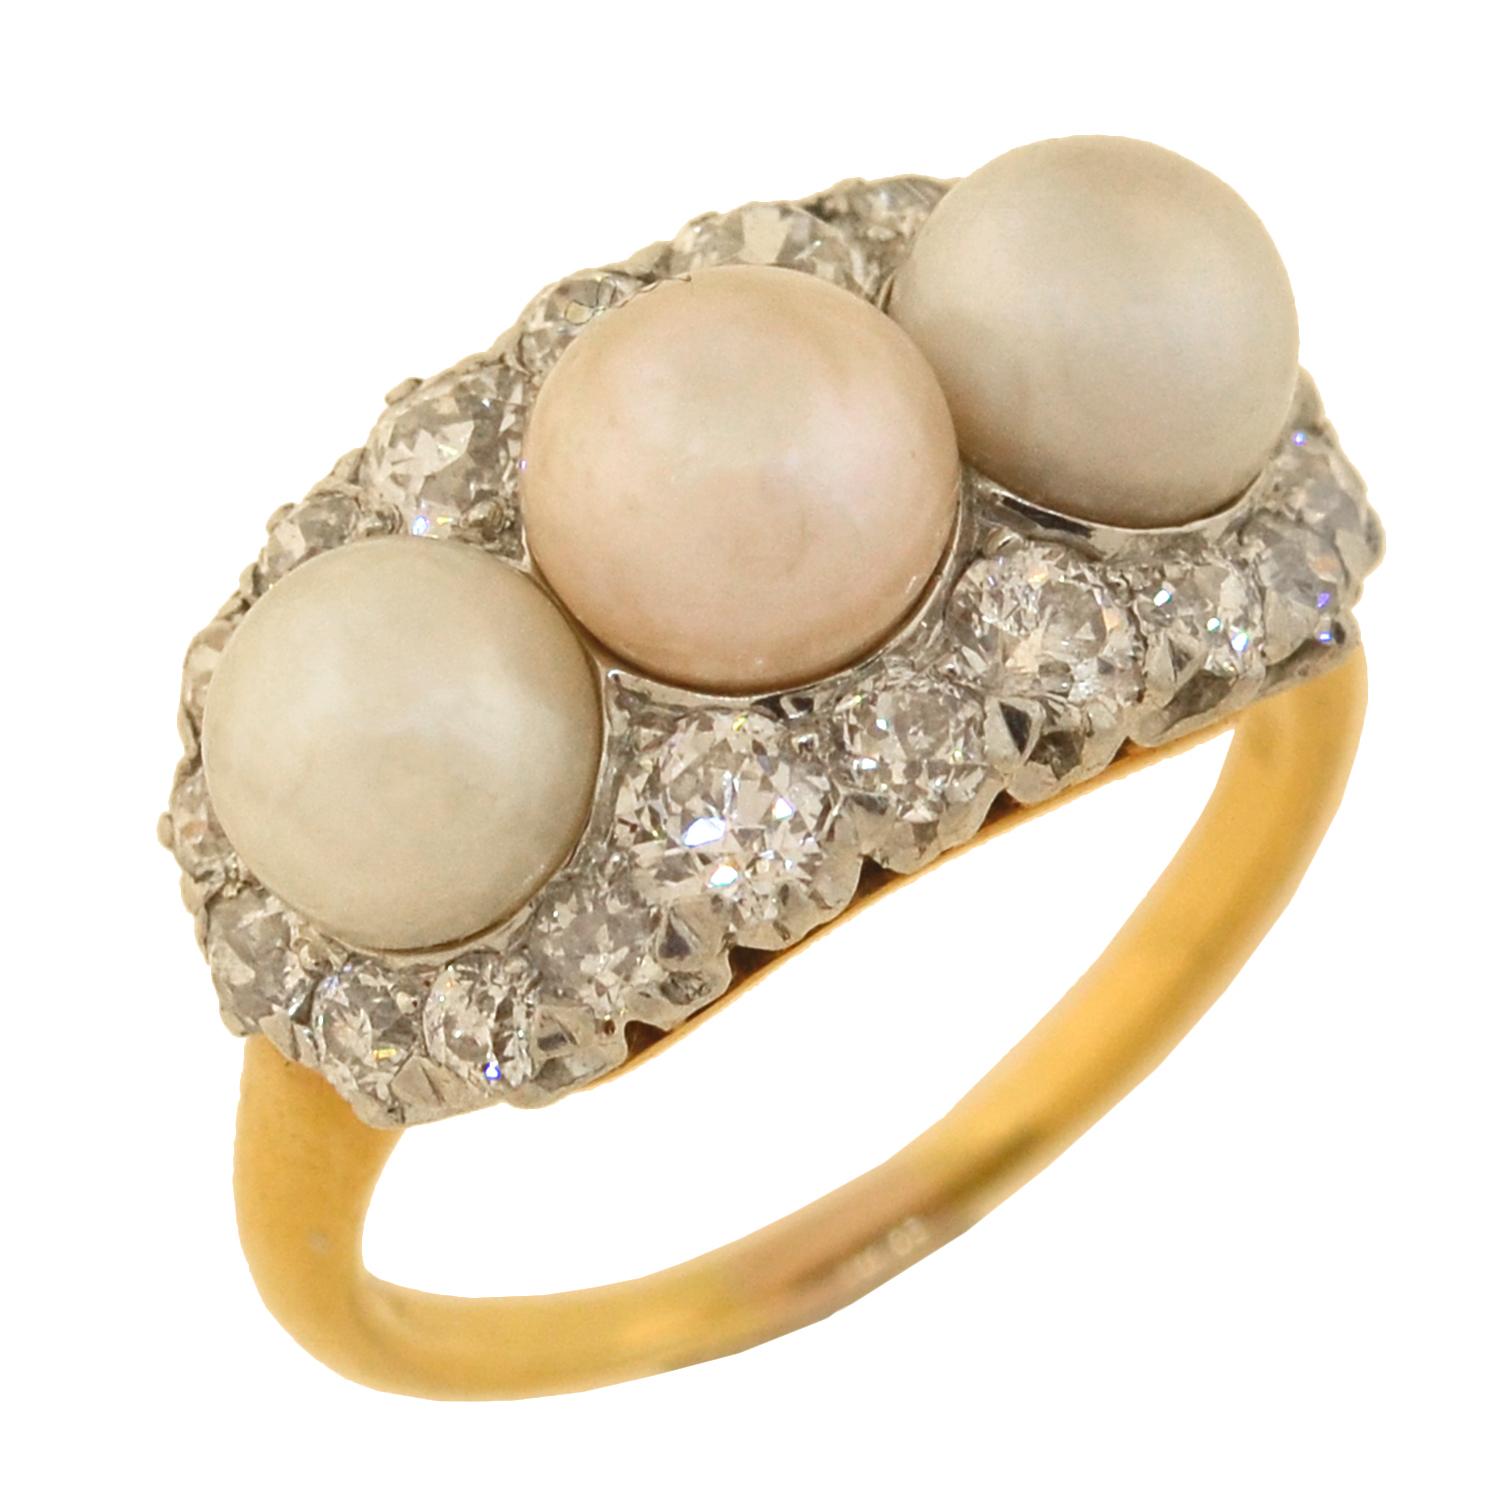 Women's Edwardian Diamond and Natural Pearl Trio Ring